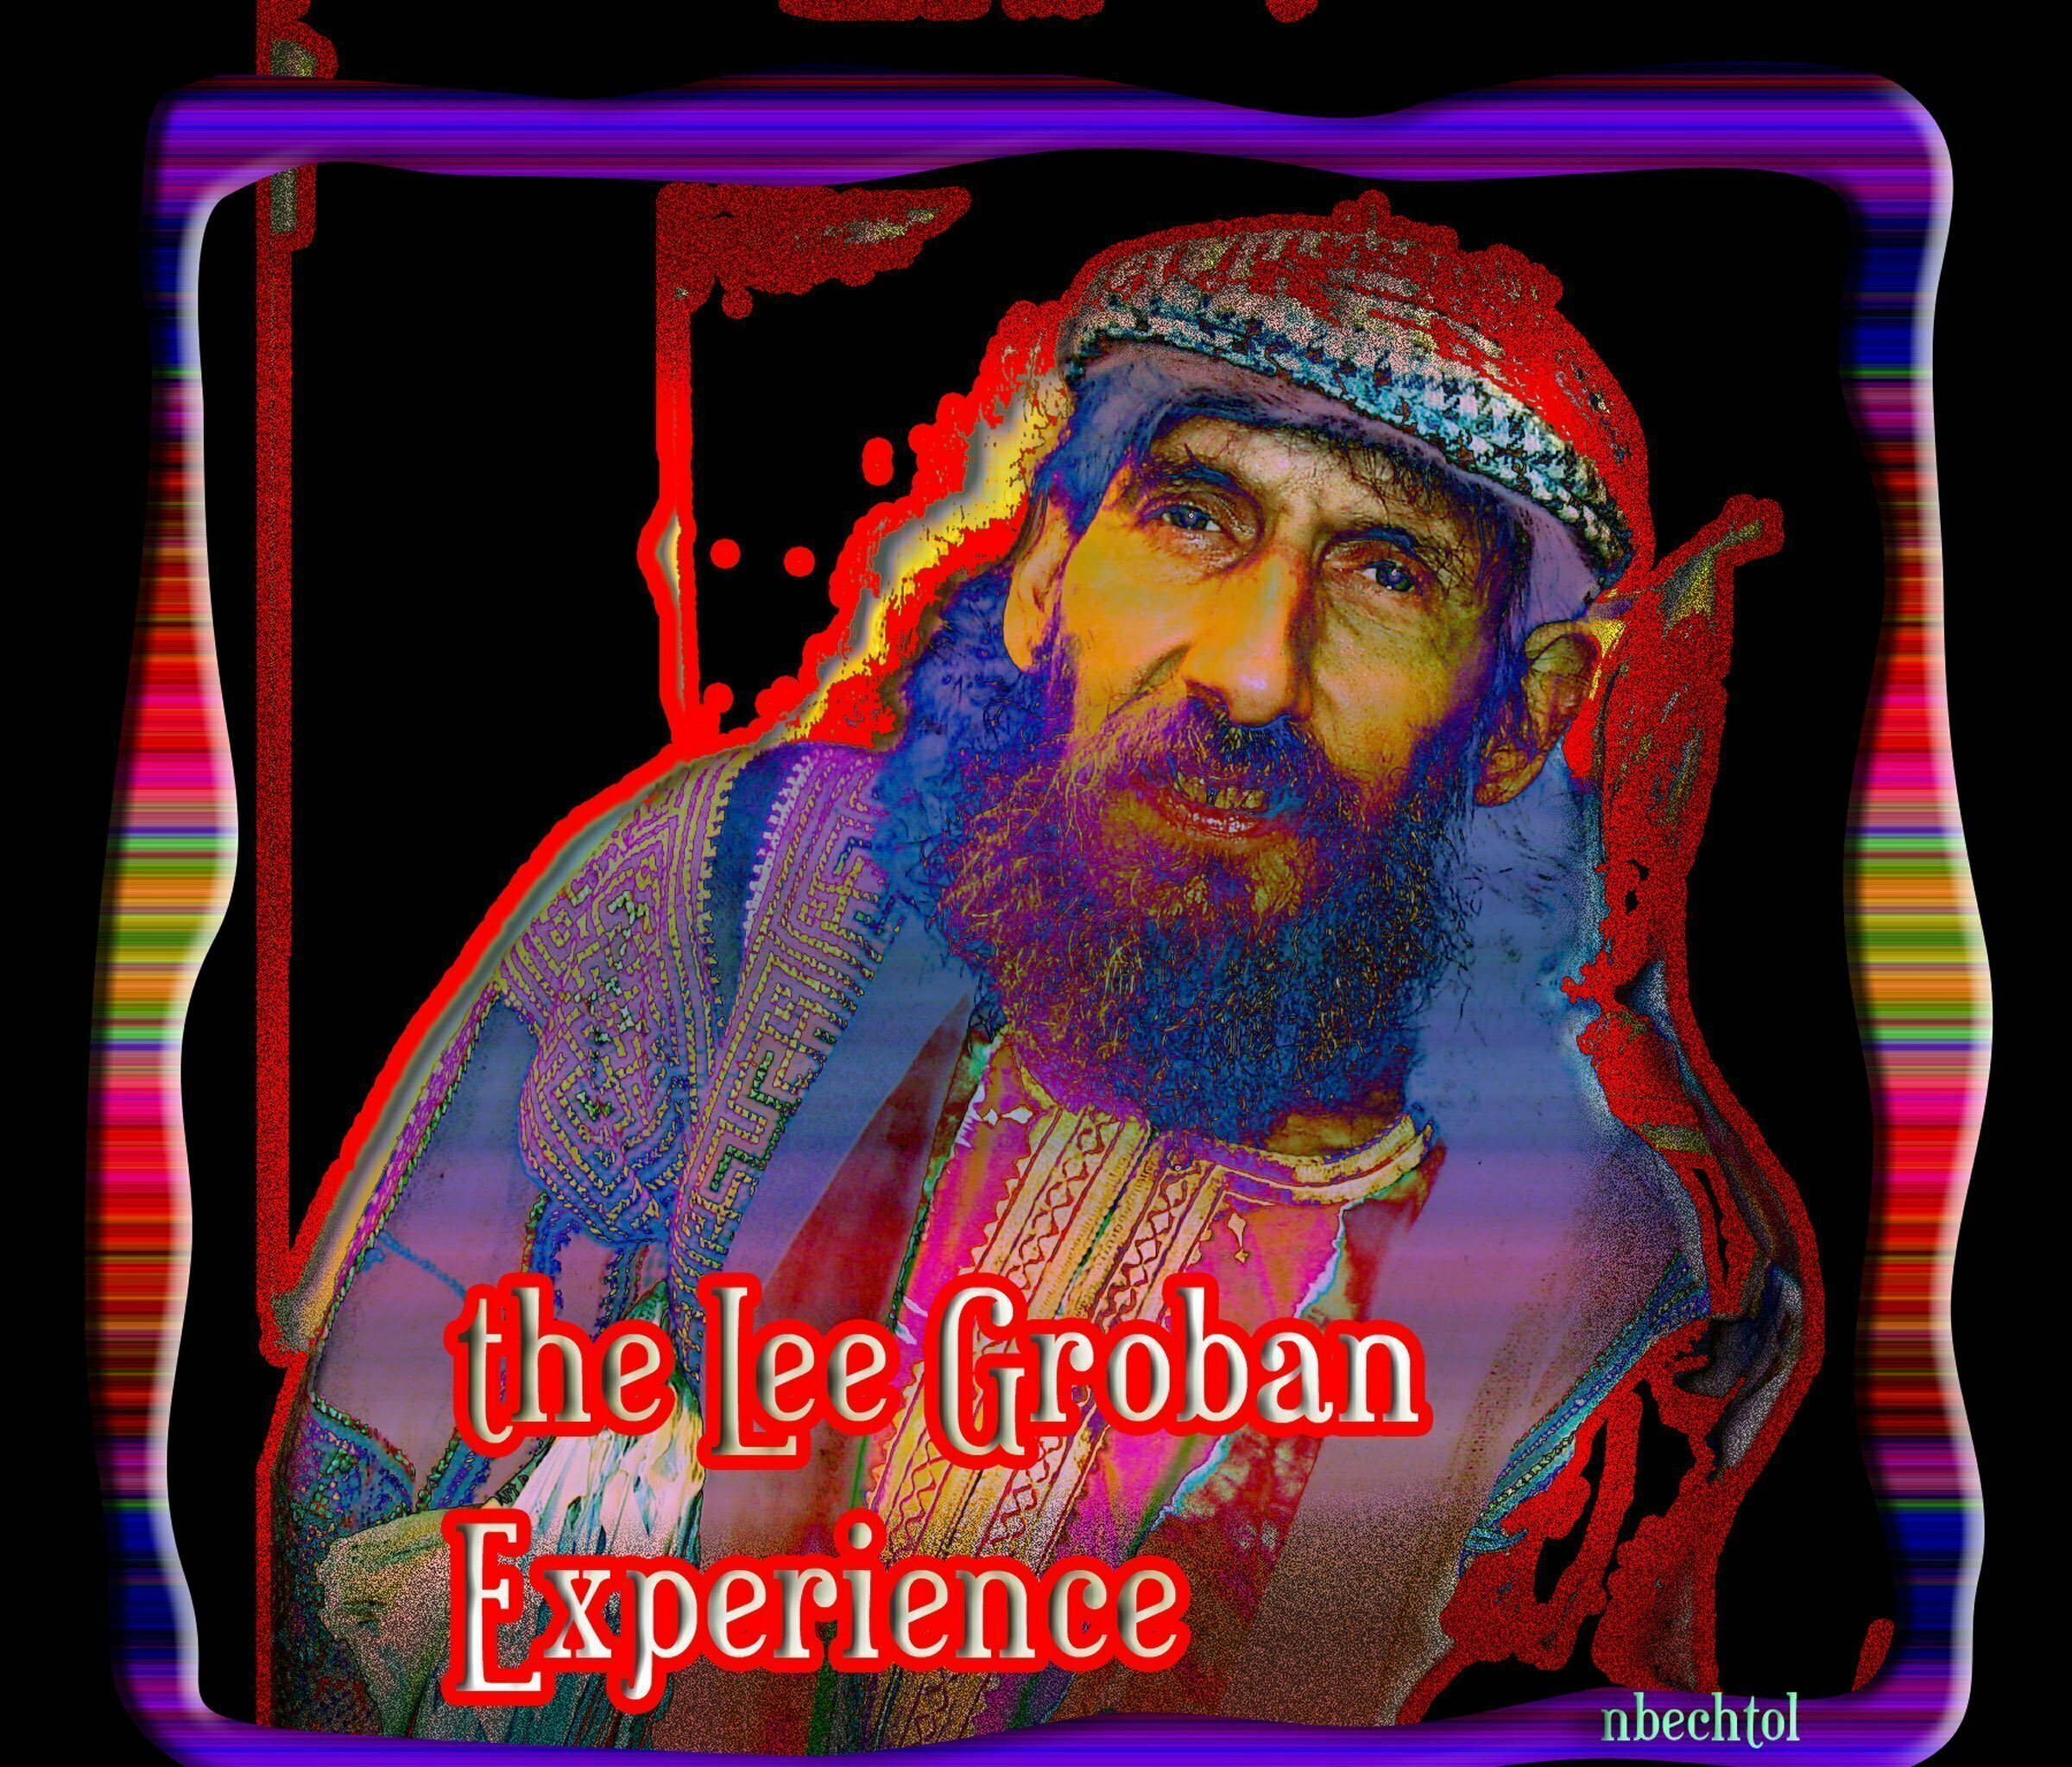 Nancy Bechtol, 'Lee Groban Experience', 2018, original Photography Other, 11 x 17  cm. Artwork description: 1911 digital painting expressionistic  Poster boy  print archival Epson inks and paper.  various sizes.  Request.  ...